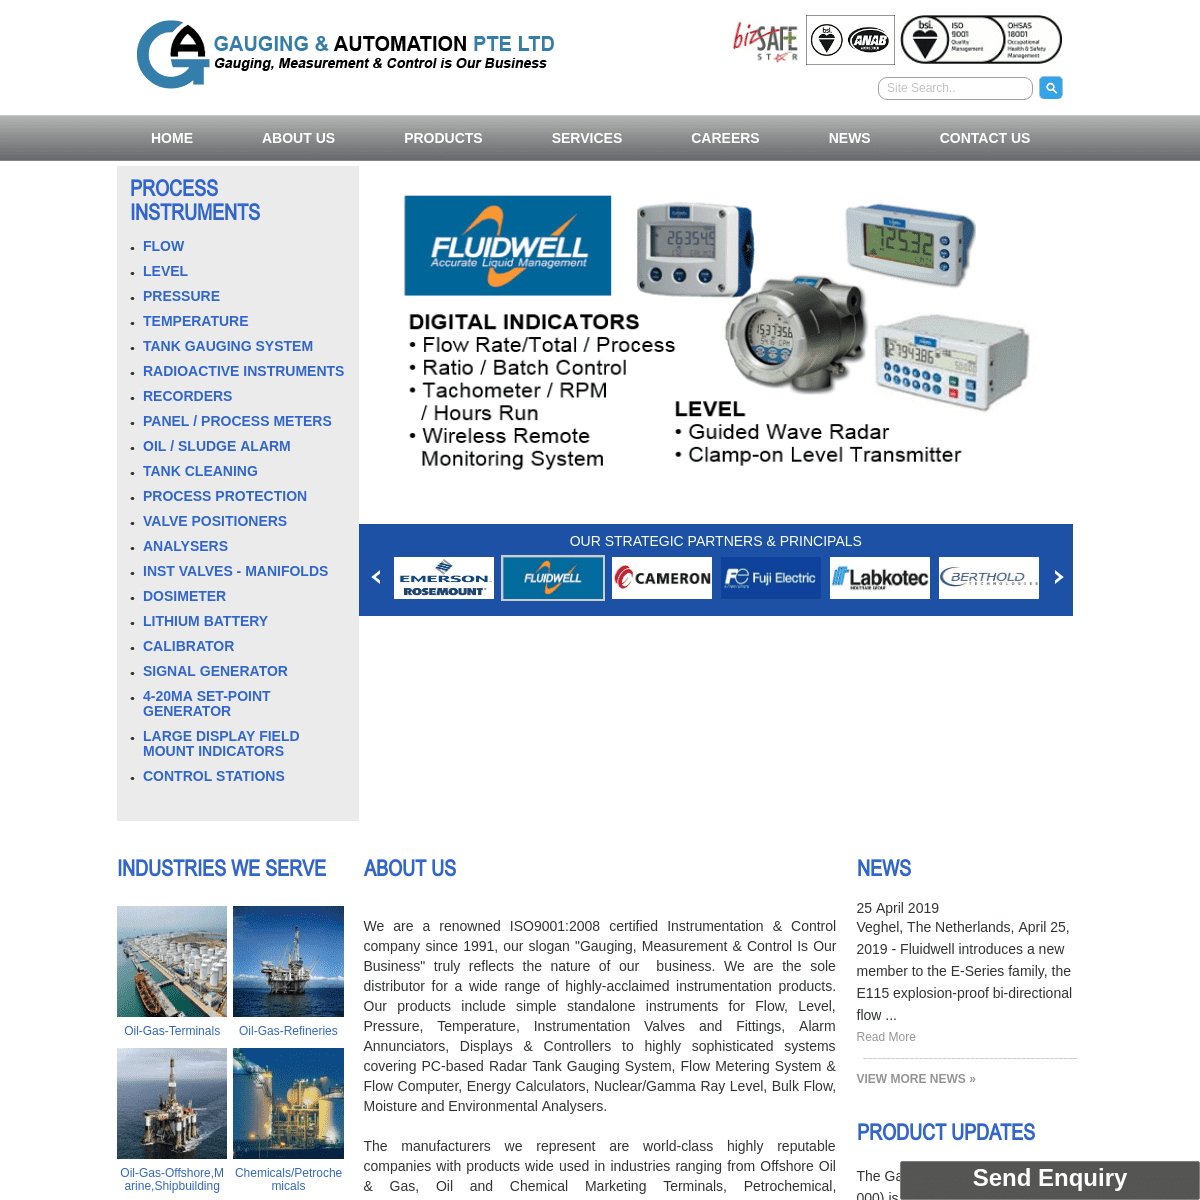 Highly  Acclaimed Instrumentation Products - Gauging & Automation Pte Ltd 